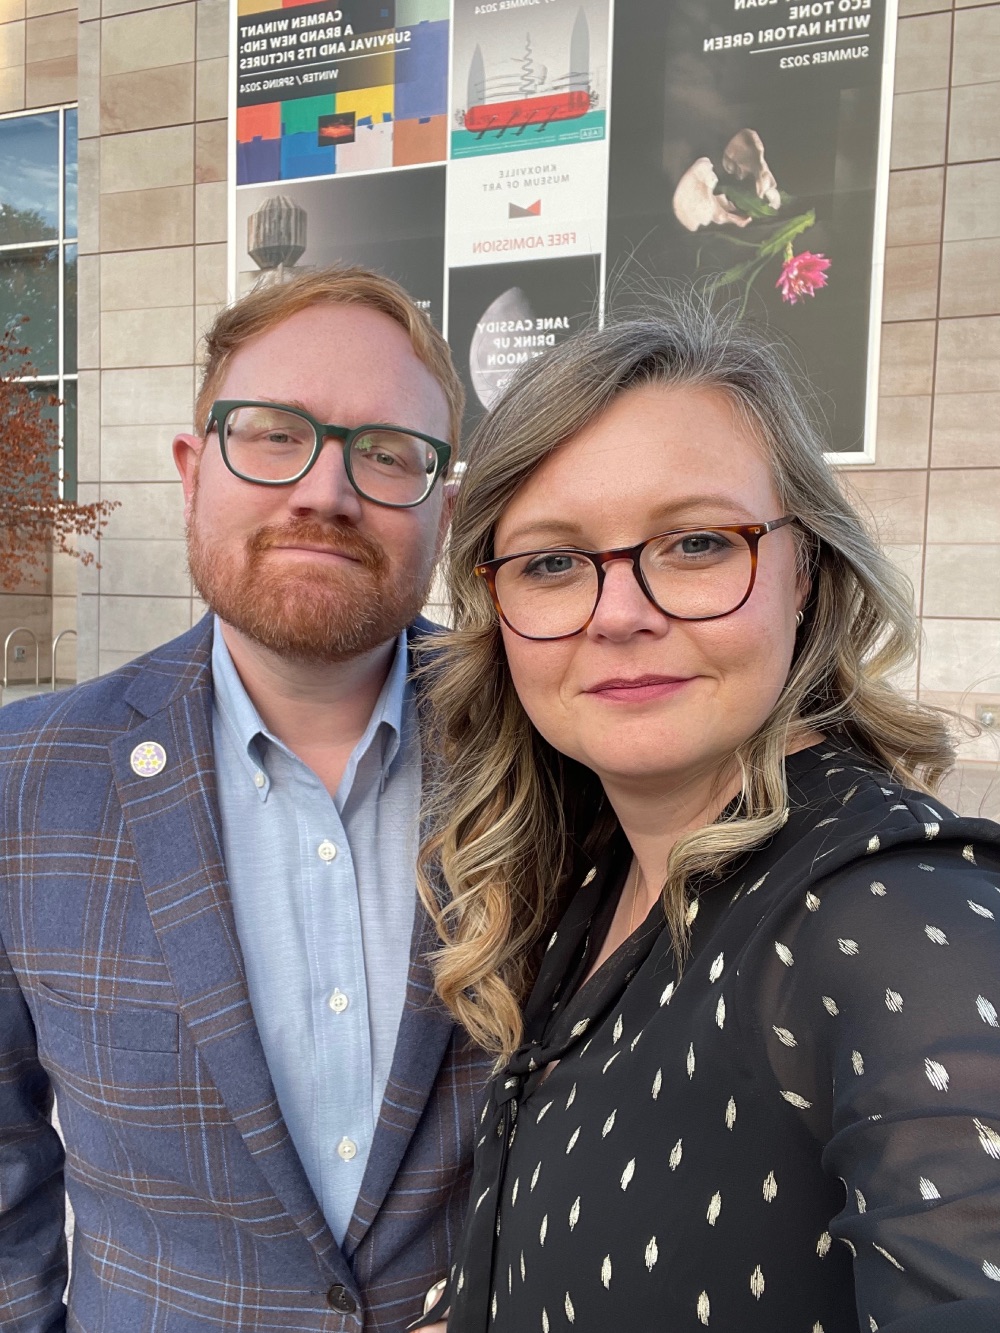 Jeremy Blair, associate professor of art education at Tennessee Tech, prepares to attend the Tennessee Art Education Association Conference with his wife, Bevin Butler, an assistant professor of art history at Tech.